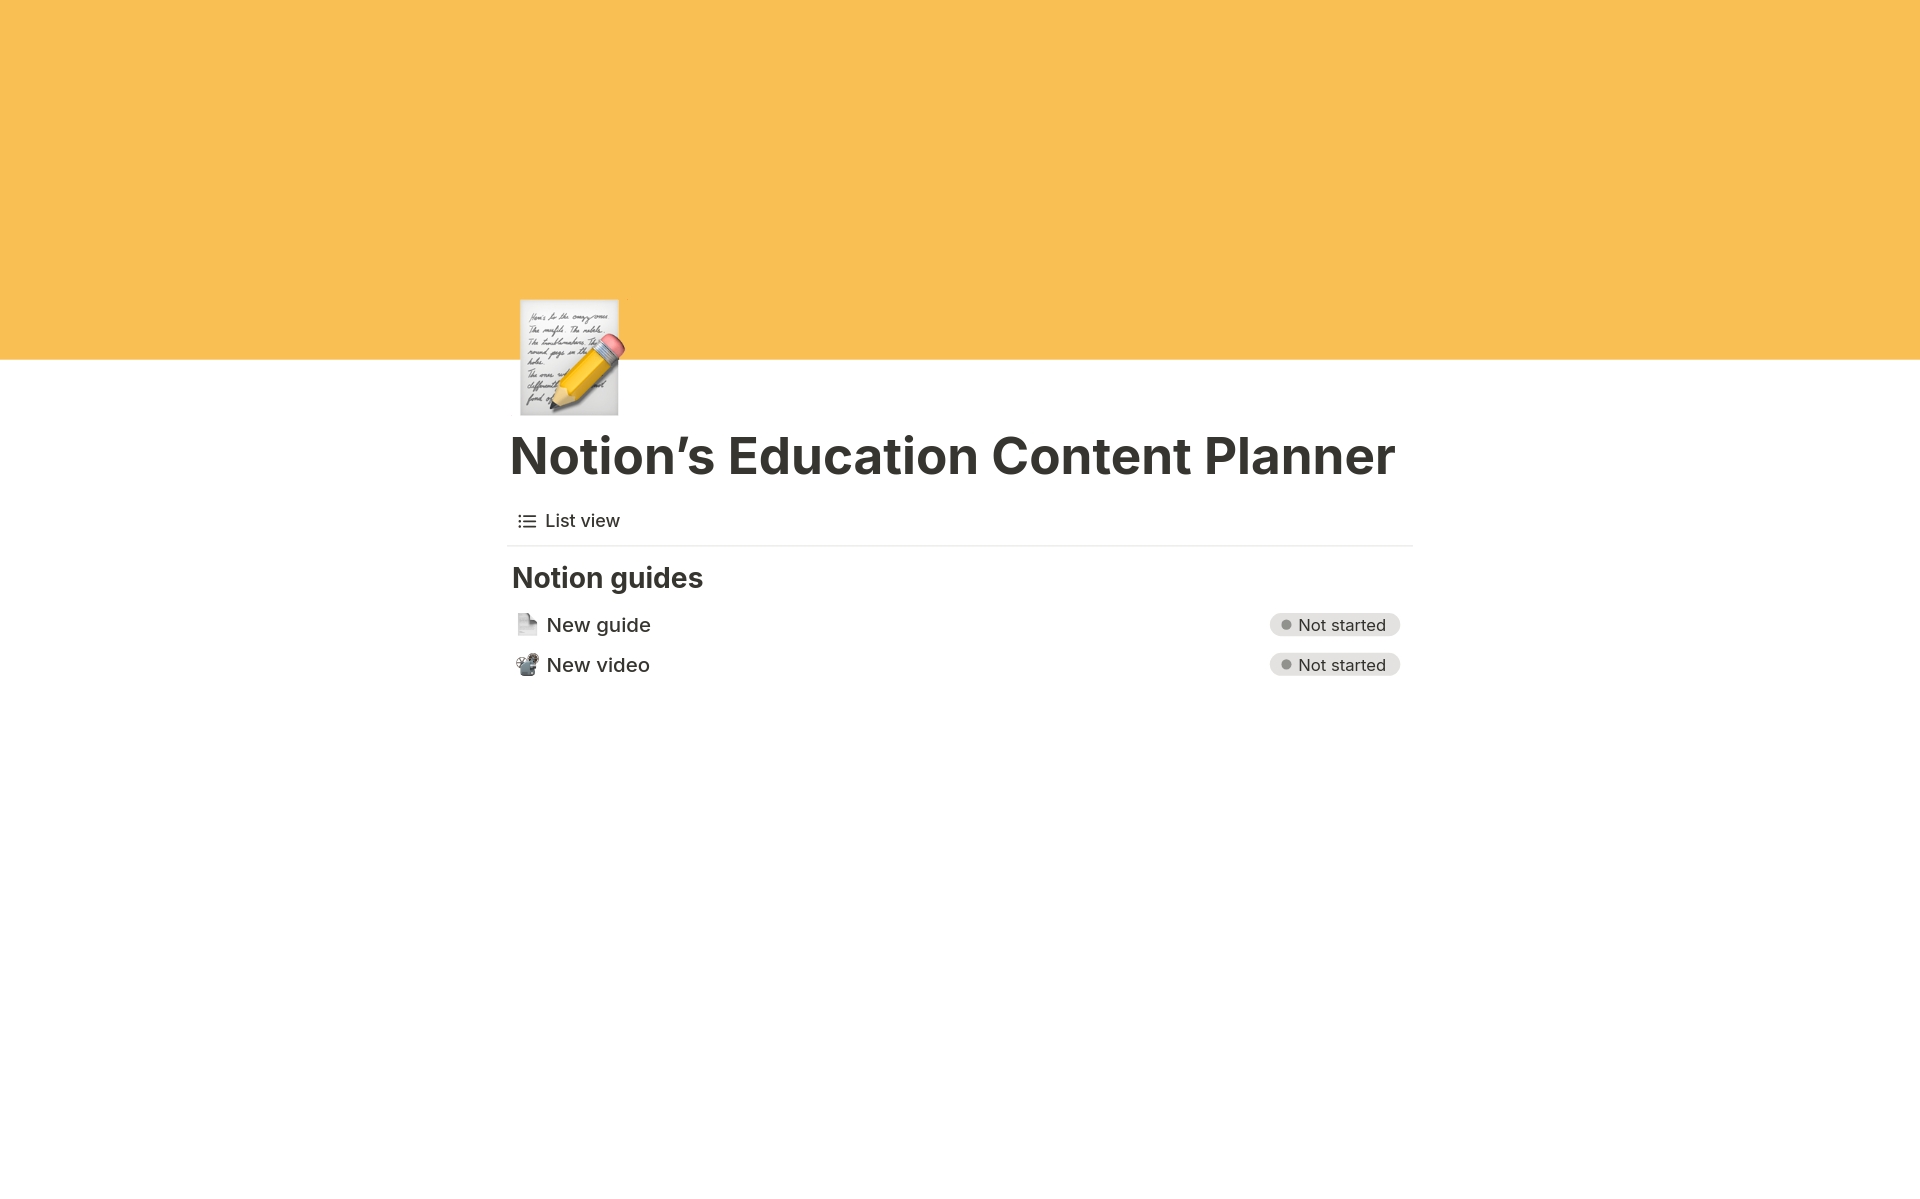 Plan and manage your educational content effectively with Notion’s Education Content Planner.